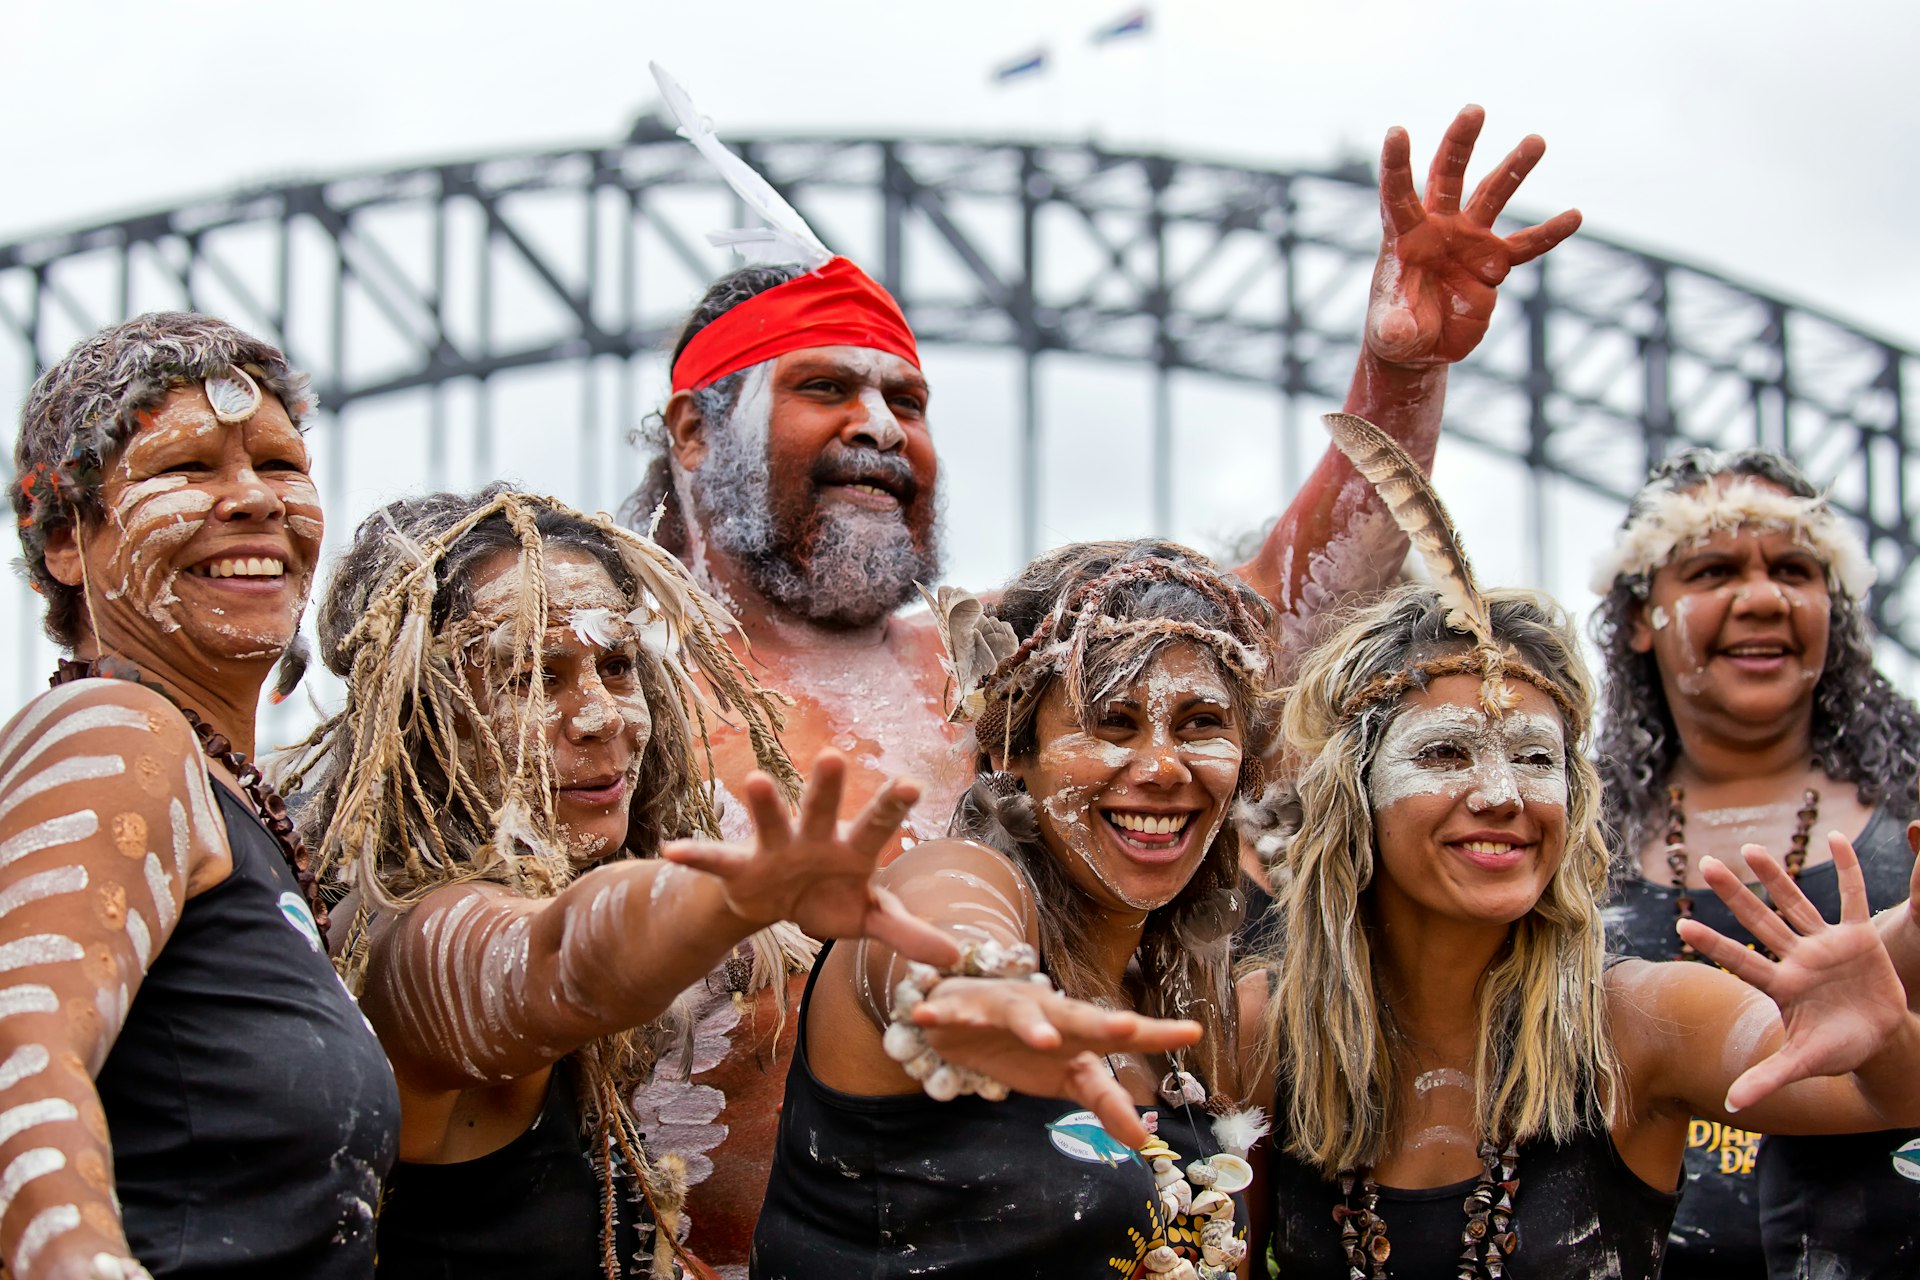 Indigenous dancers strike a pose during the Homeground festival - a major annual celebration of aboriginal culture.